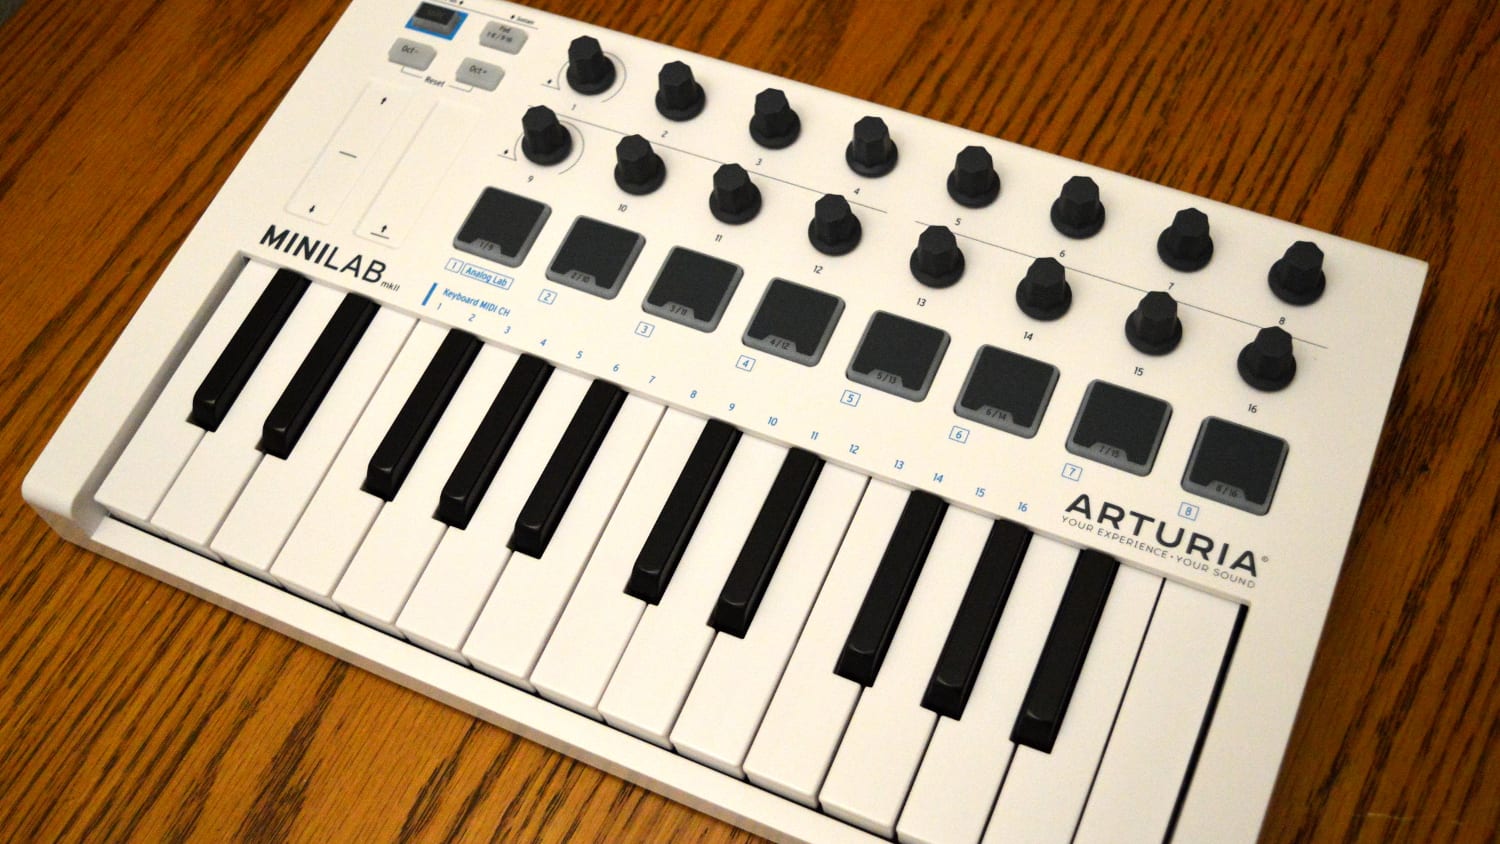 Arturia MiniLab MKII MIDI Controller Review - All Things Gear